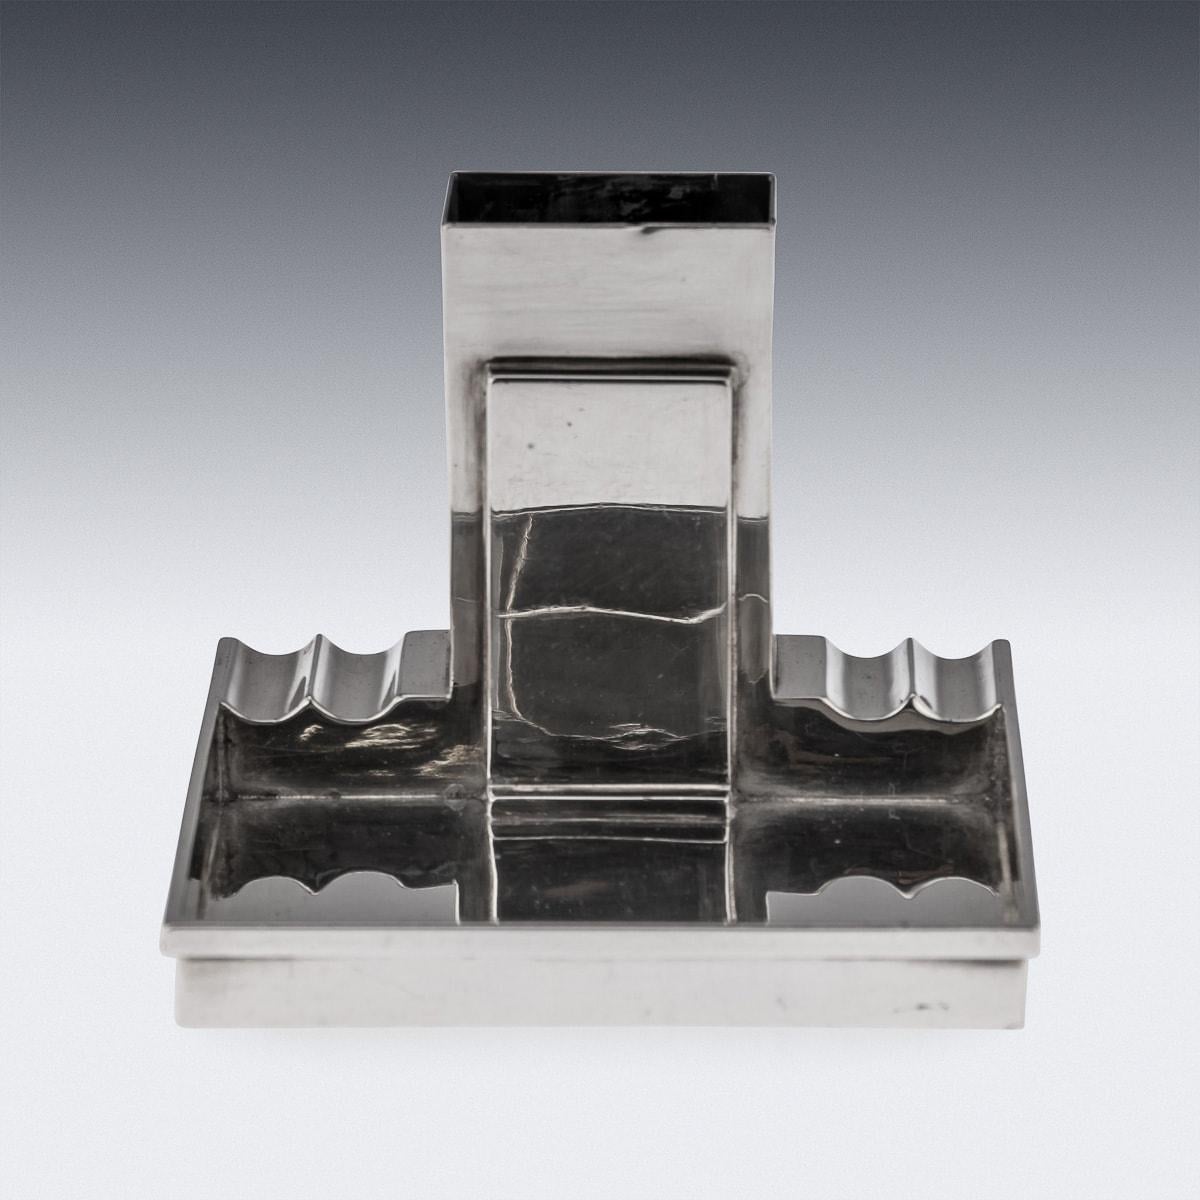 A fantastic mid-20th Century English solid silver ashtray with match striker by Walker & Hall. Featuring a rectangular ashtray with four spaces to rest a cigar. In the centre, a space to store a matchbox, allowing the striker to be visible and